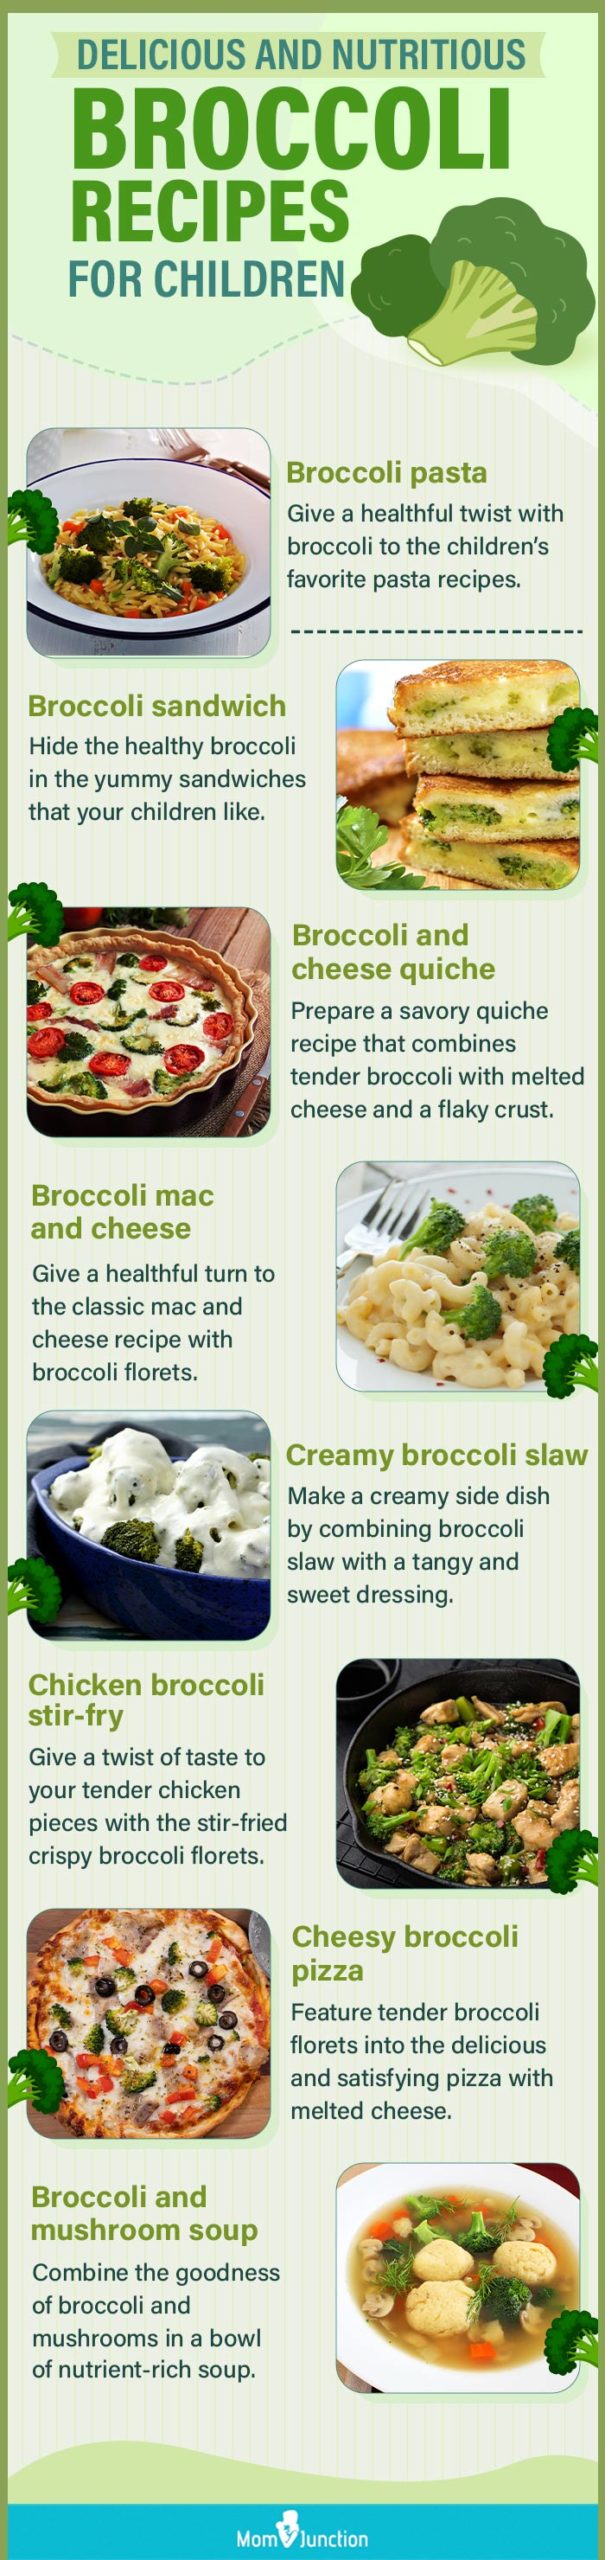 delicious and nutritious broccoli recipes for children (infographic)